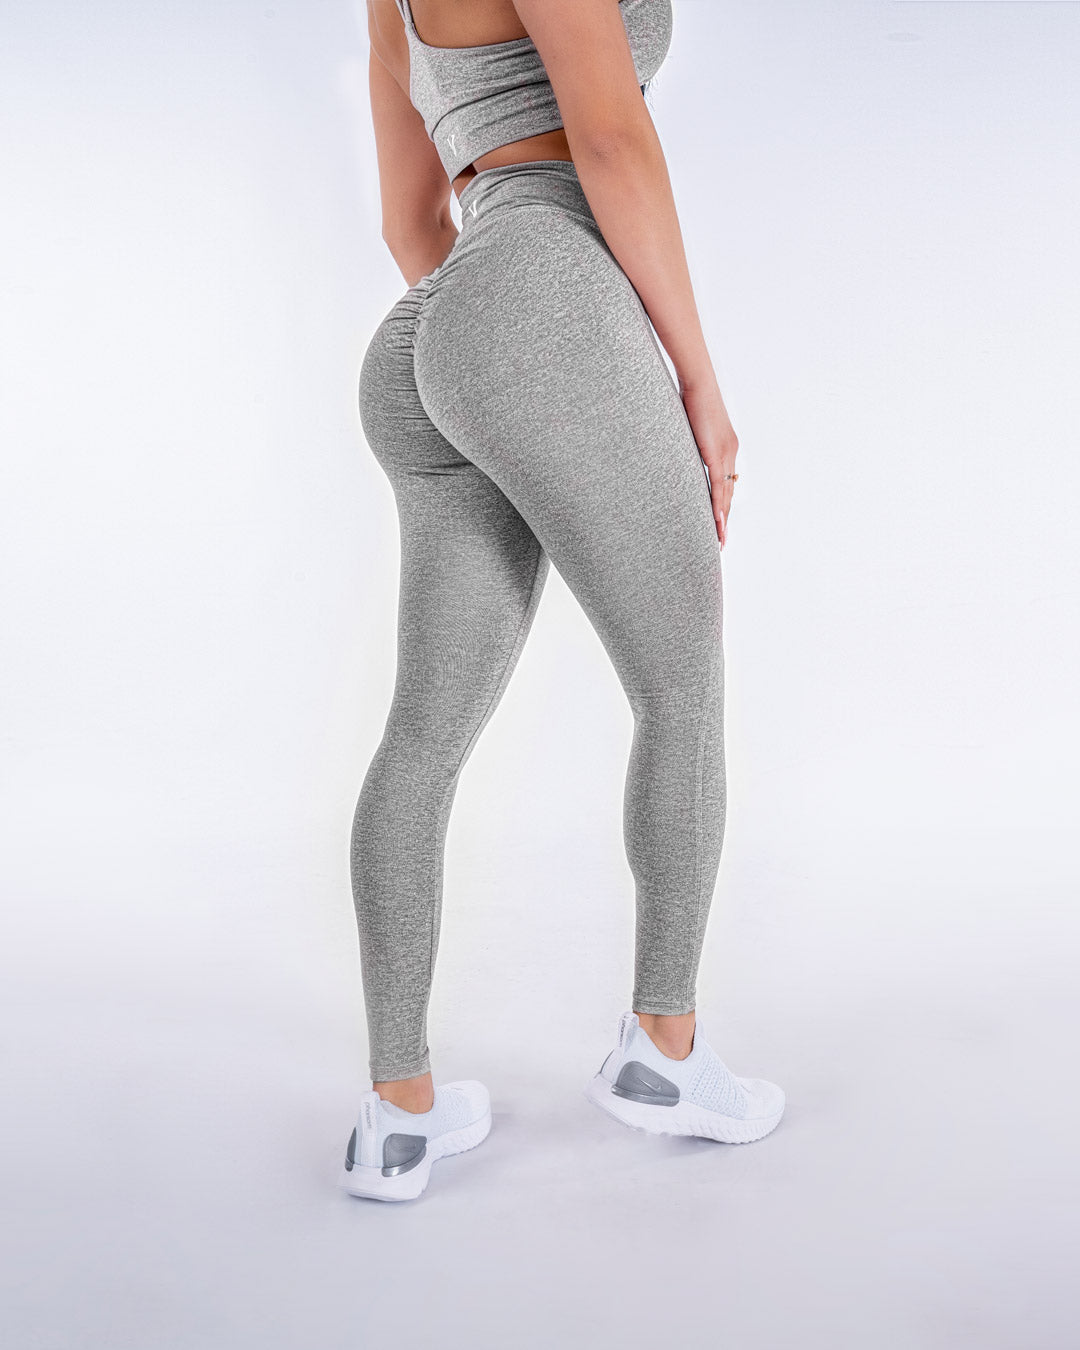 Leggings Signature - - Heather Grey Booty Assria Collection Scrunch Vivd